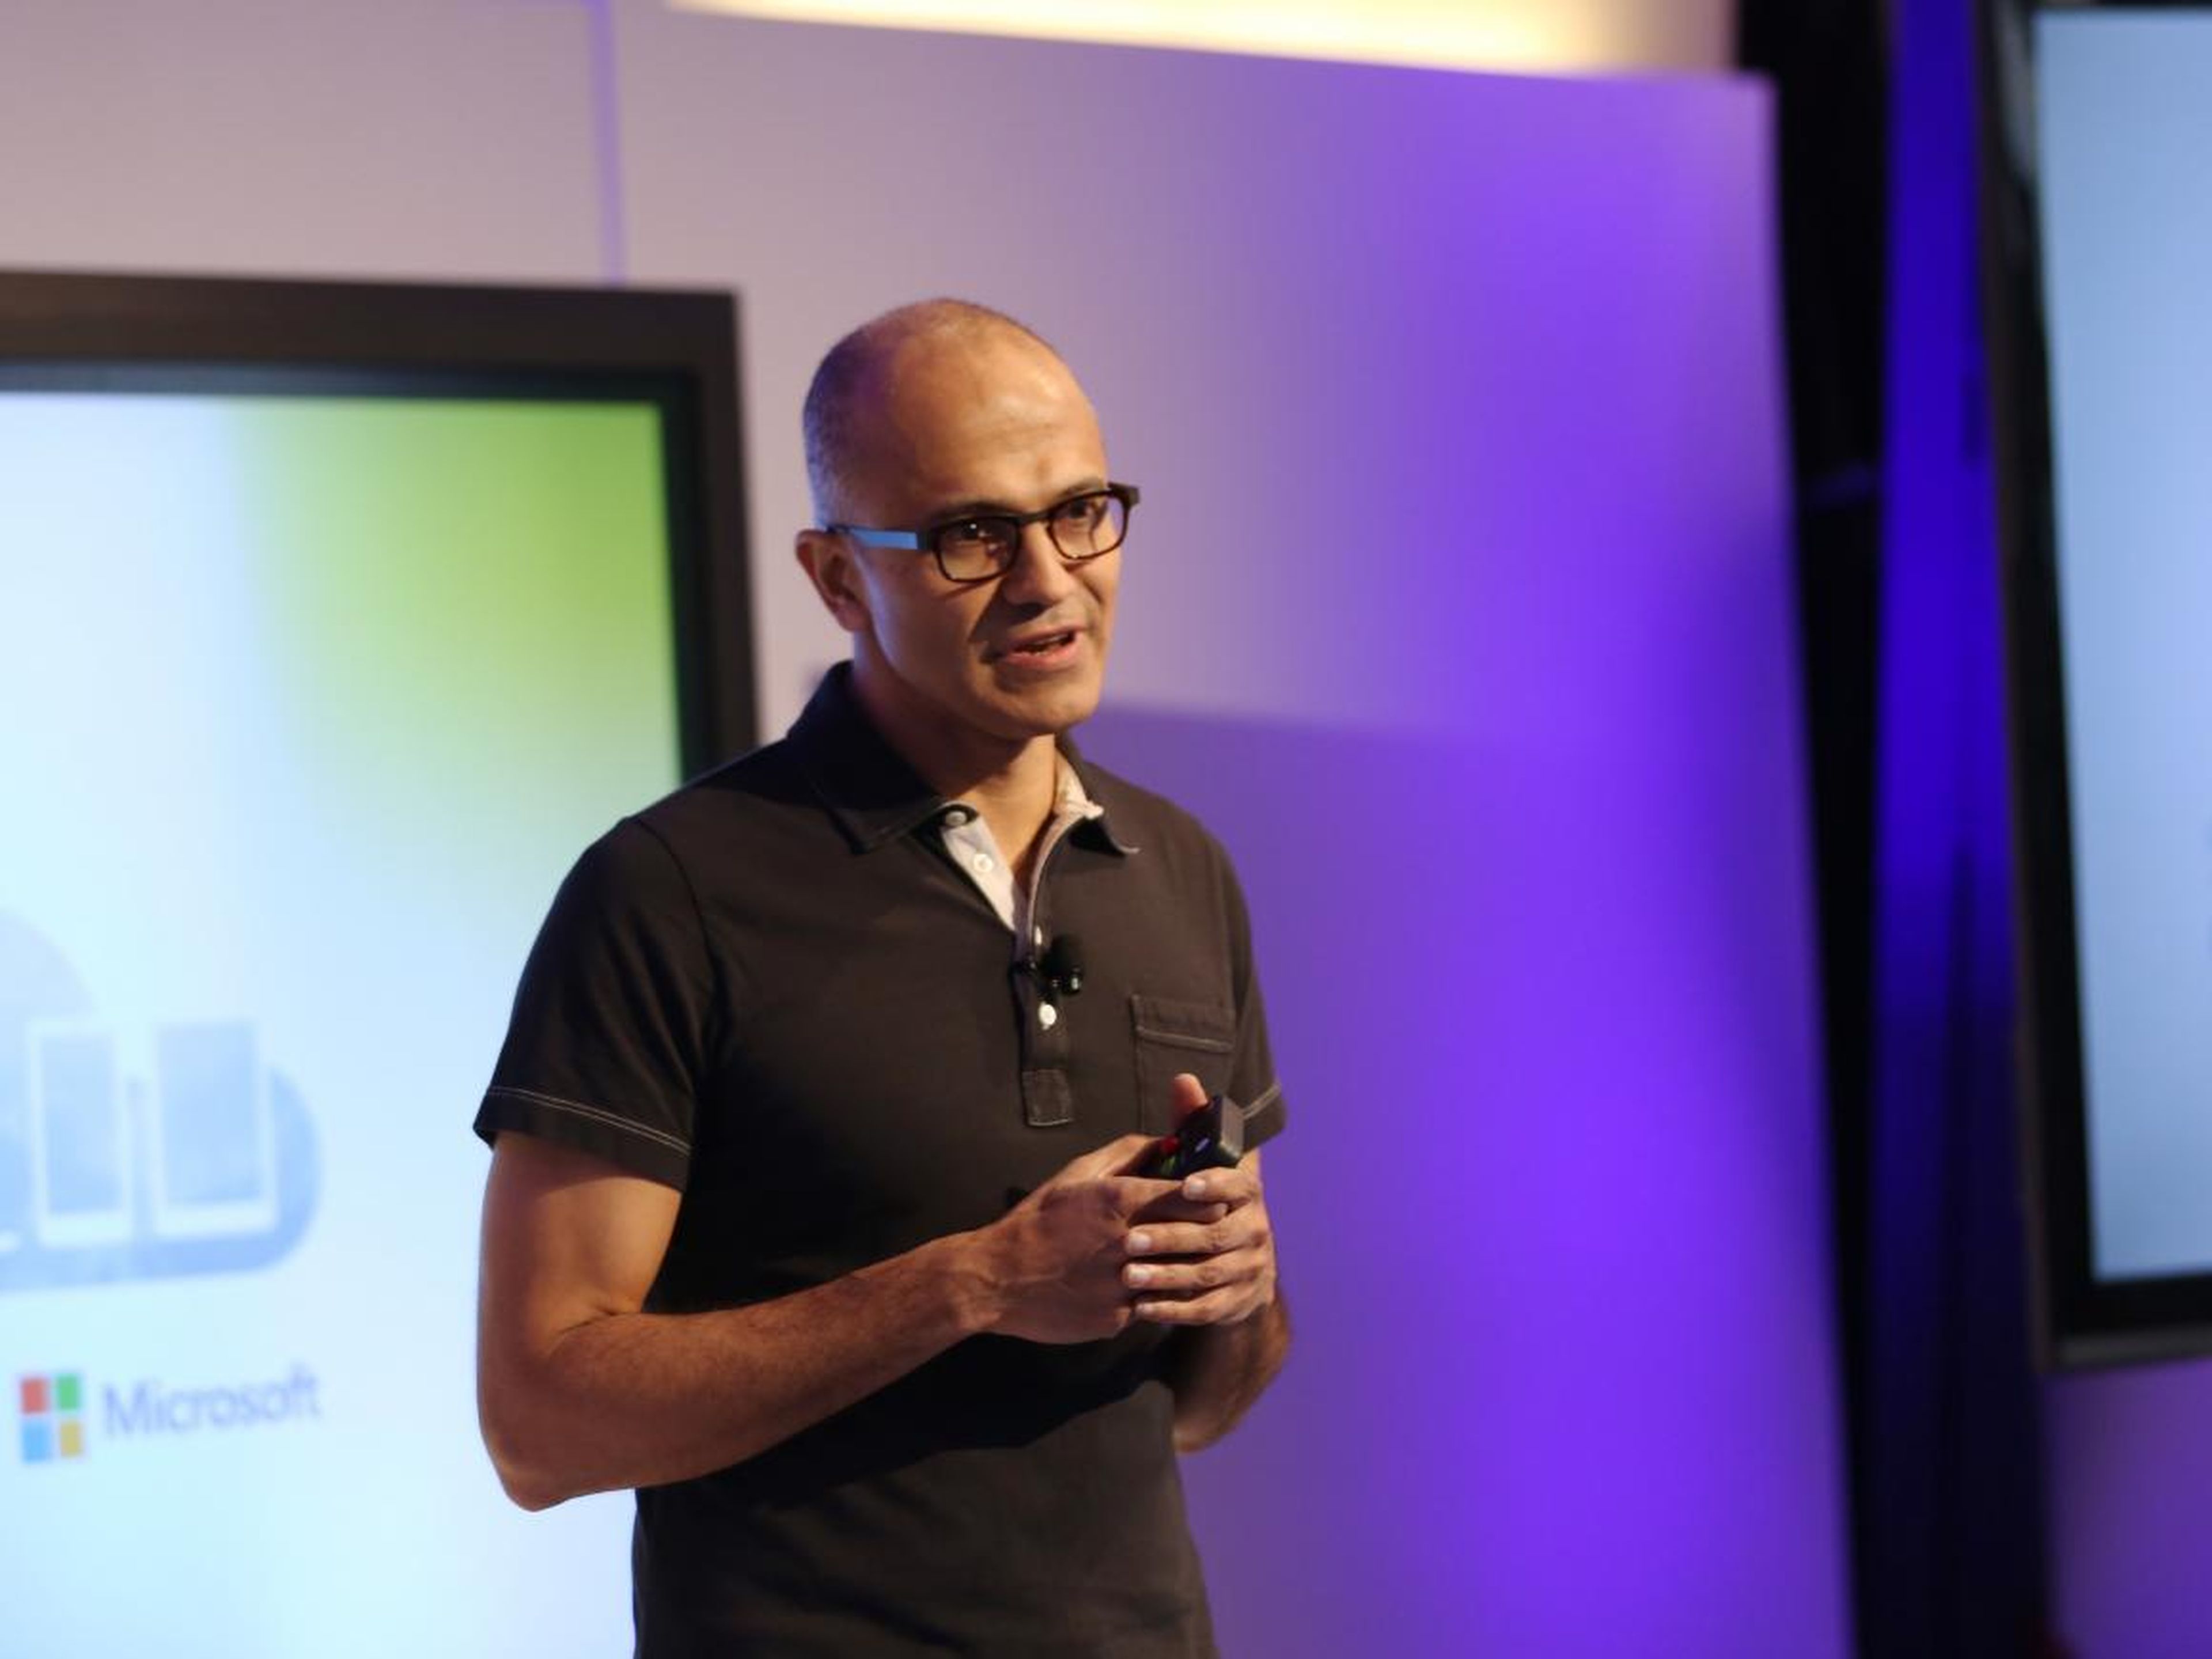 Nadella at his first major public appearance in 2014 after being named CEO of Microsoft.